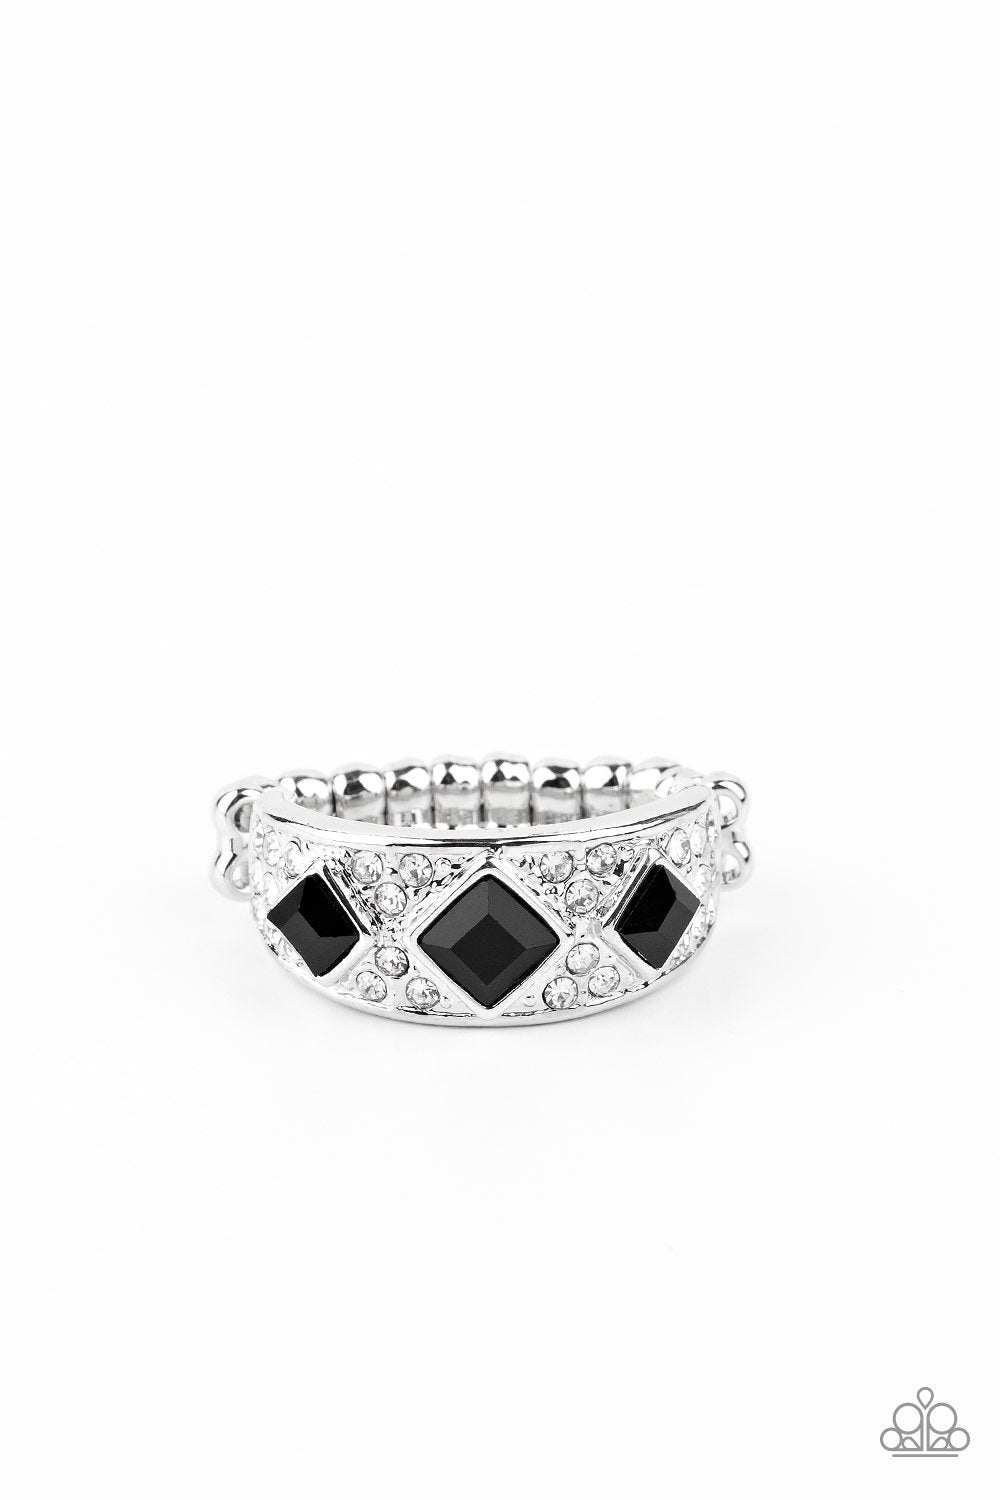 New Age Nouveau Black and White Rhinestone Ring - Paparazzi Accessories - lightbox -CarasShop.com - $5 Jewelry by Cara Jewels